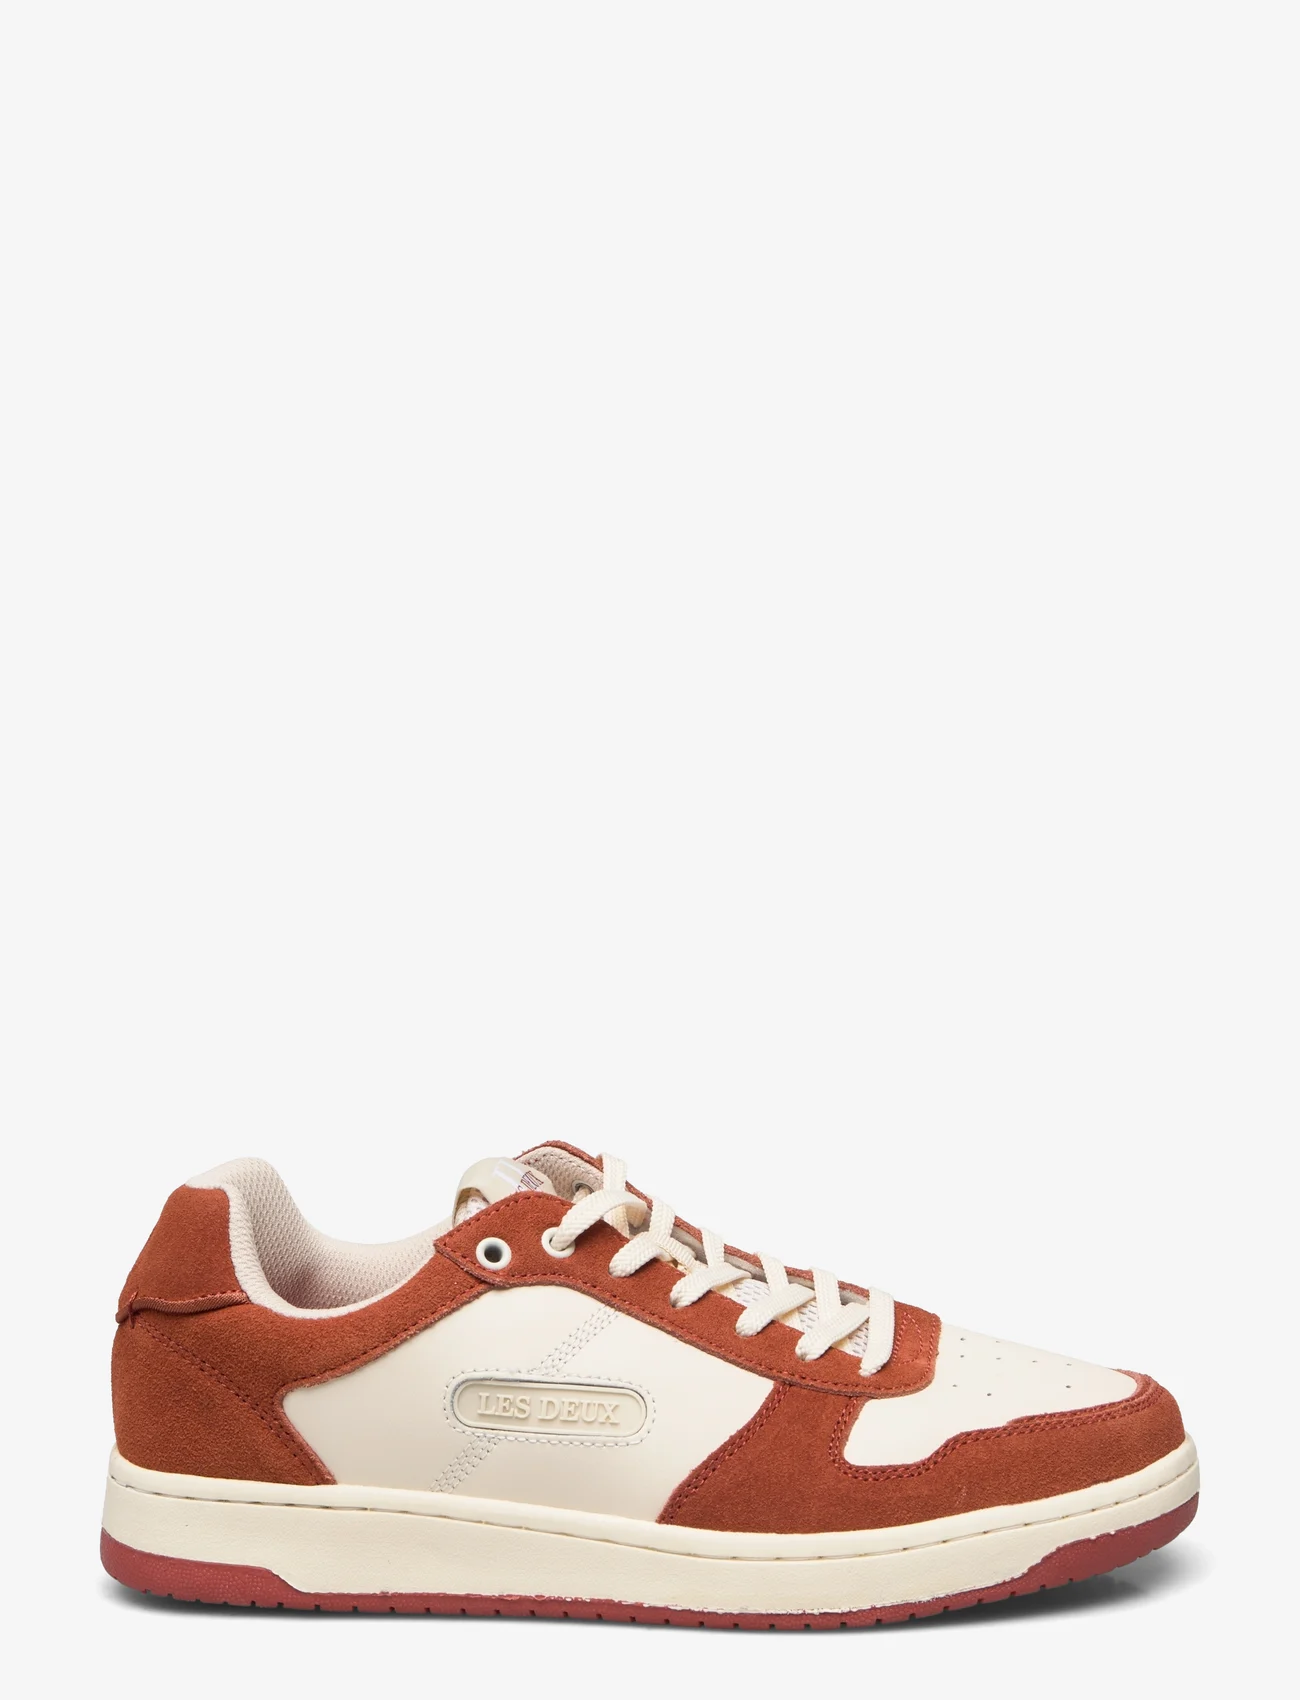 Les Deux - Wright Basketball Sneaker - låga sneakers - white/rust red - 1